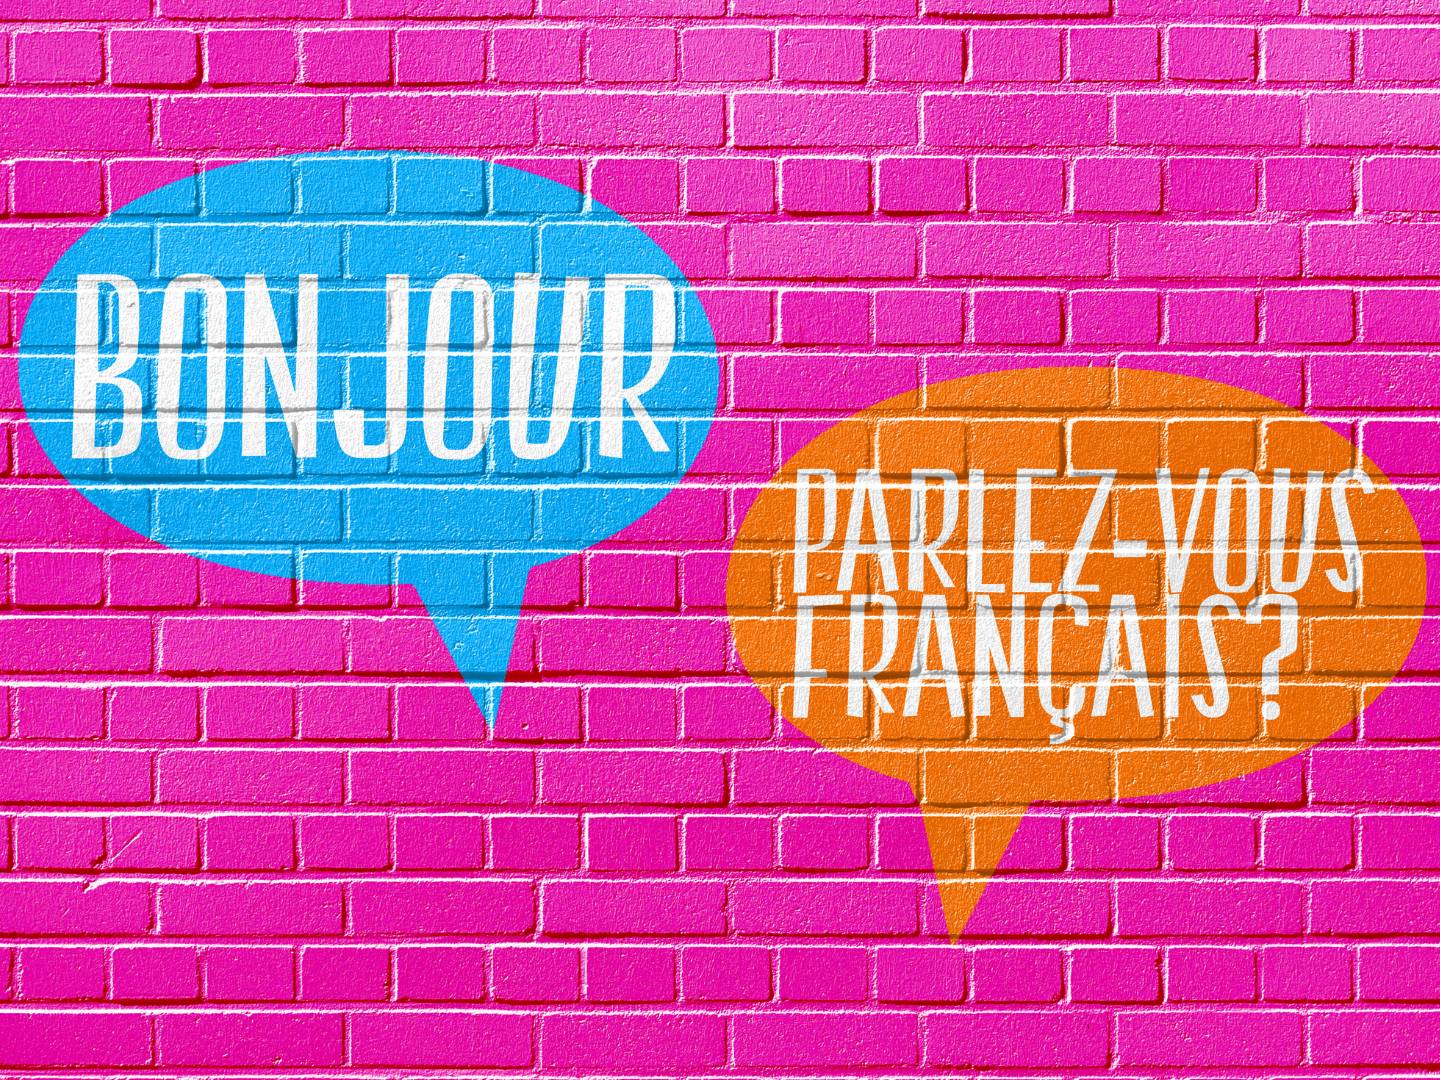 A wall with a sign asking if you speak French